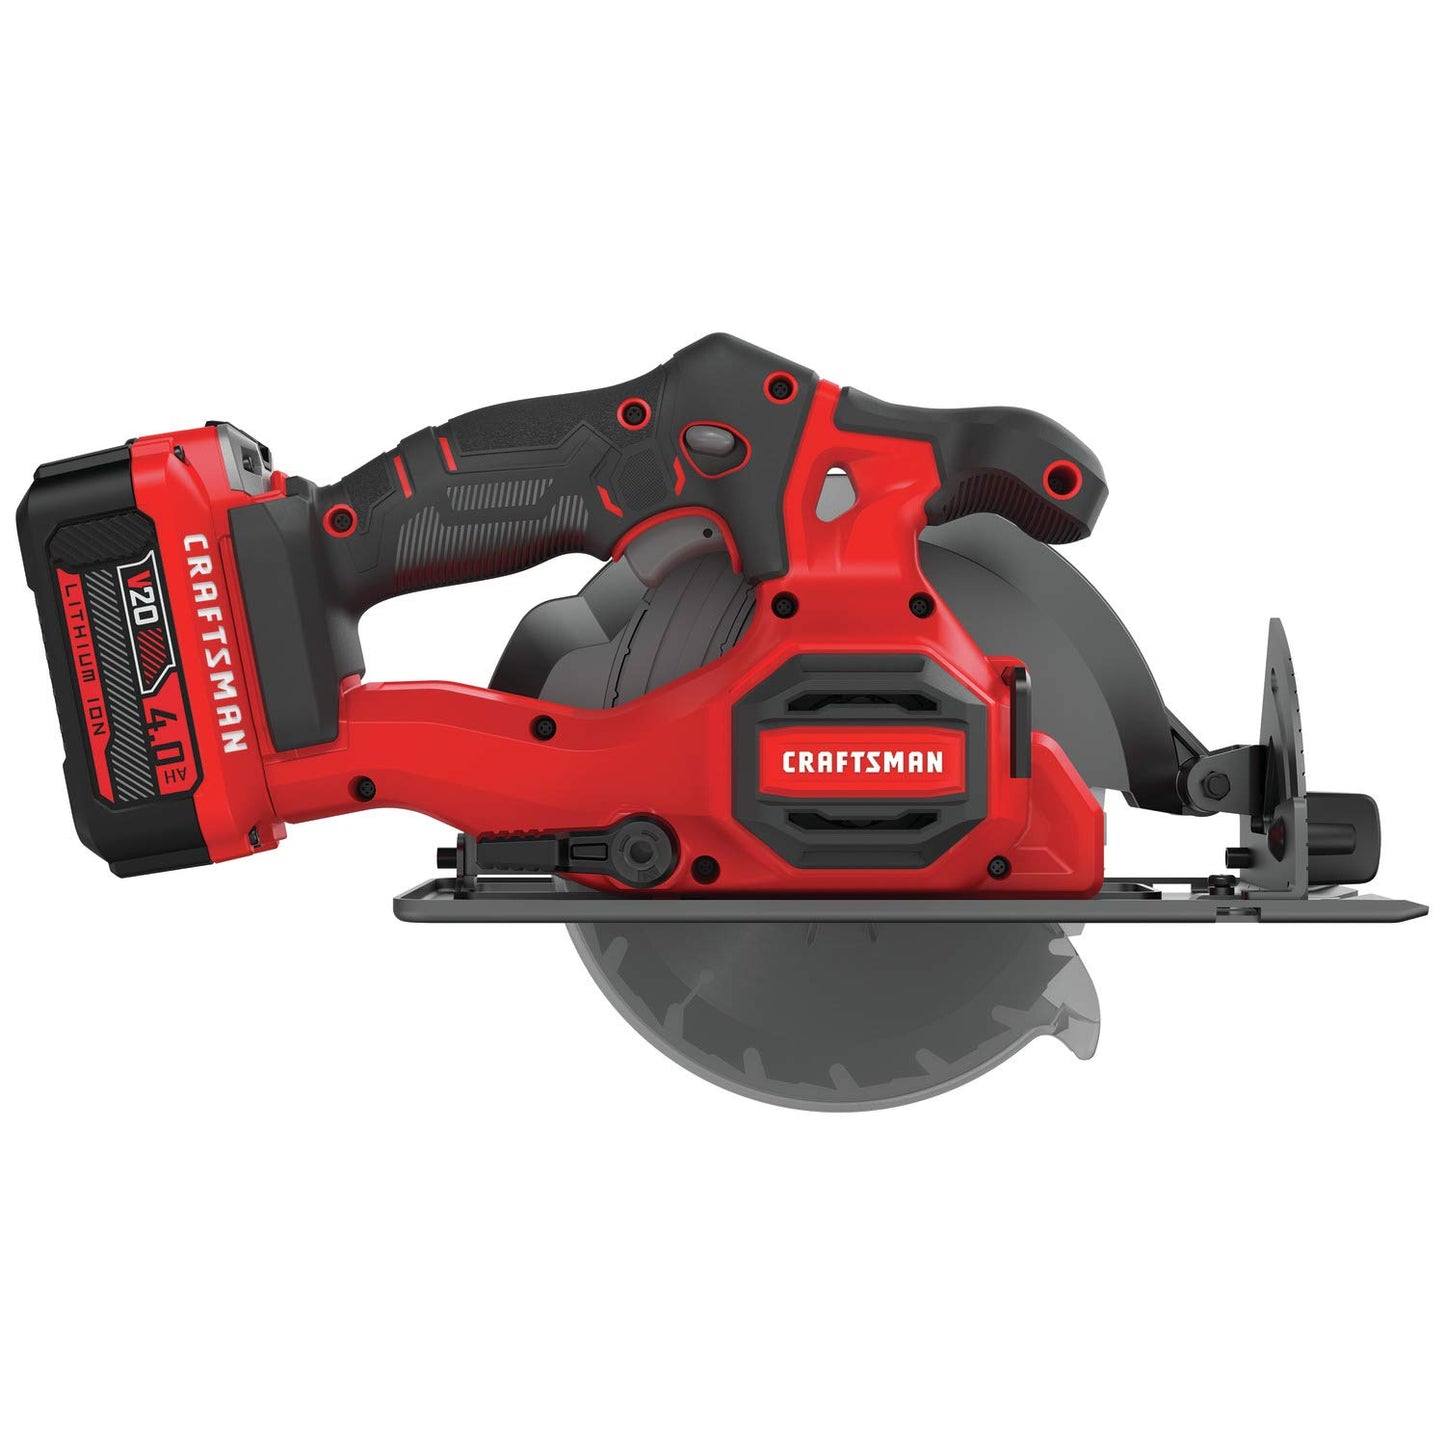 CRAFTSMAN V20 Cordless Circular Saw Kit, 6-1/2 inch, Battery and Charger Included (CMCS500M1)